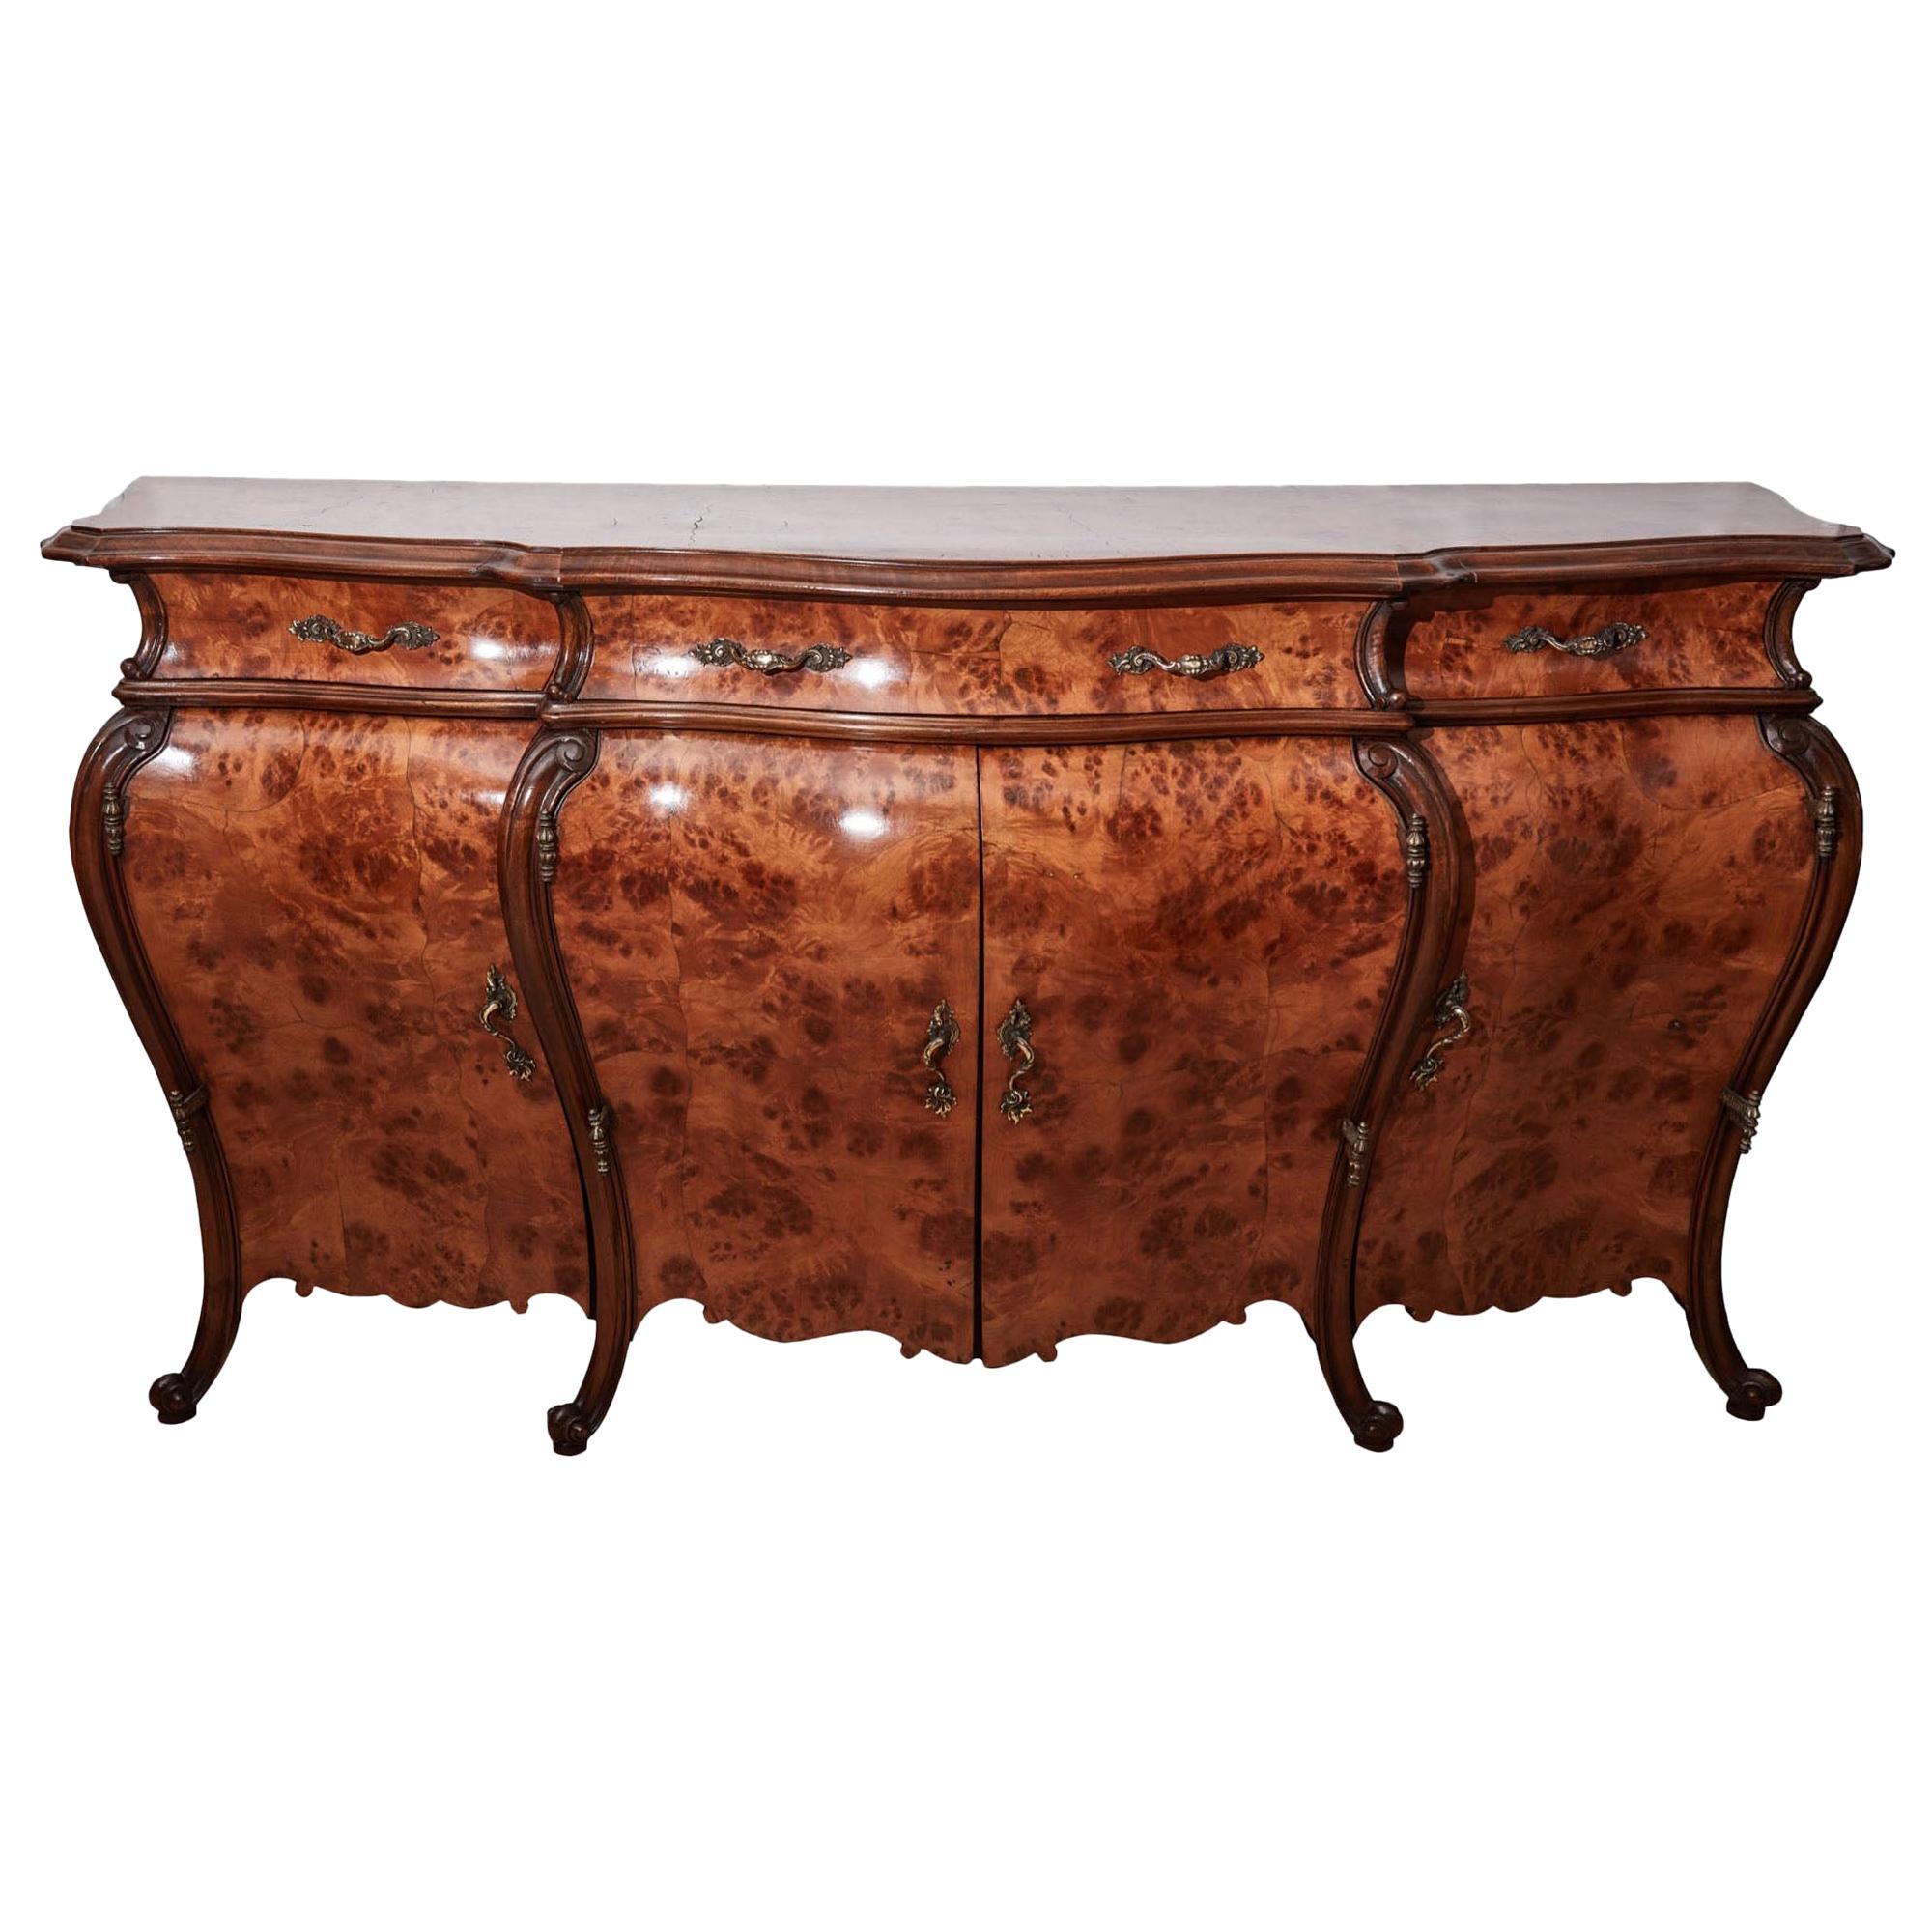 Large Antique French Burr Walnut Bombe Shaped Sideboard For Sale